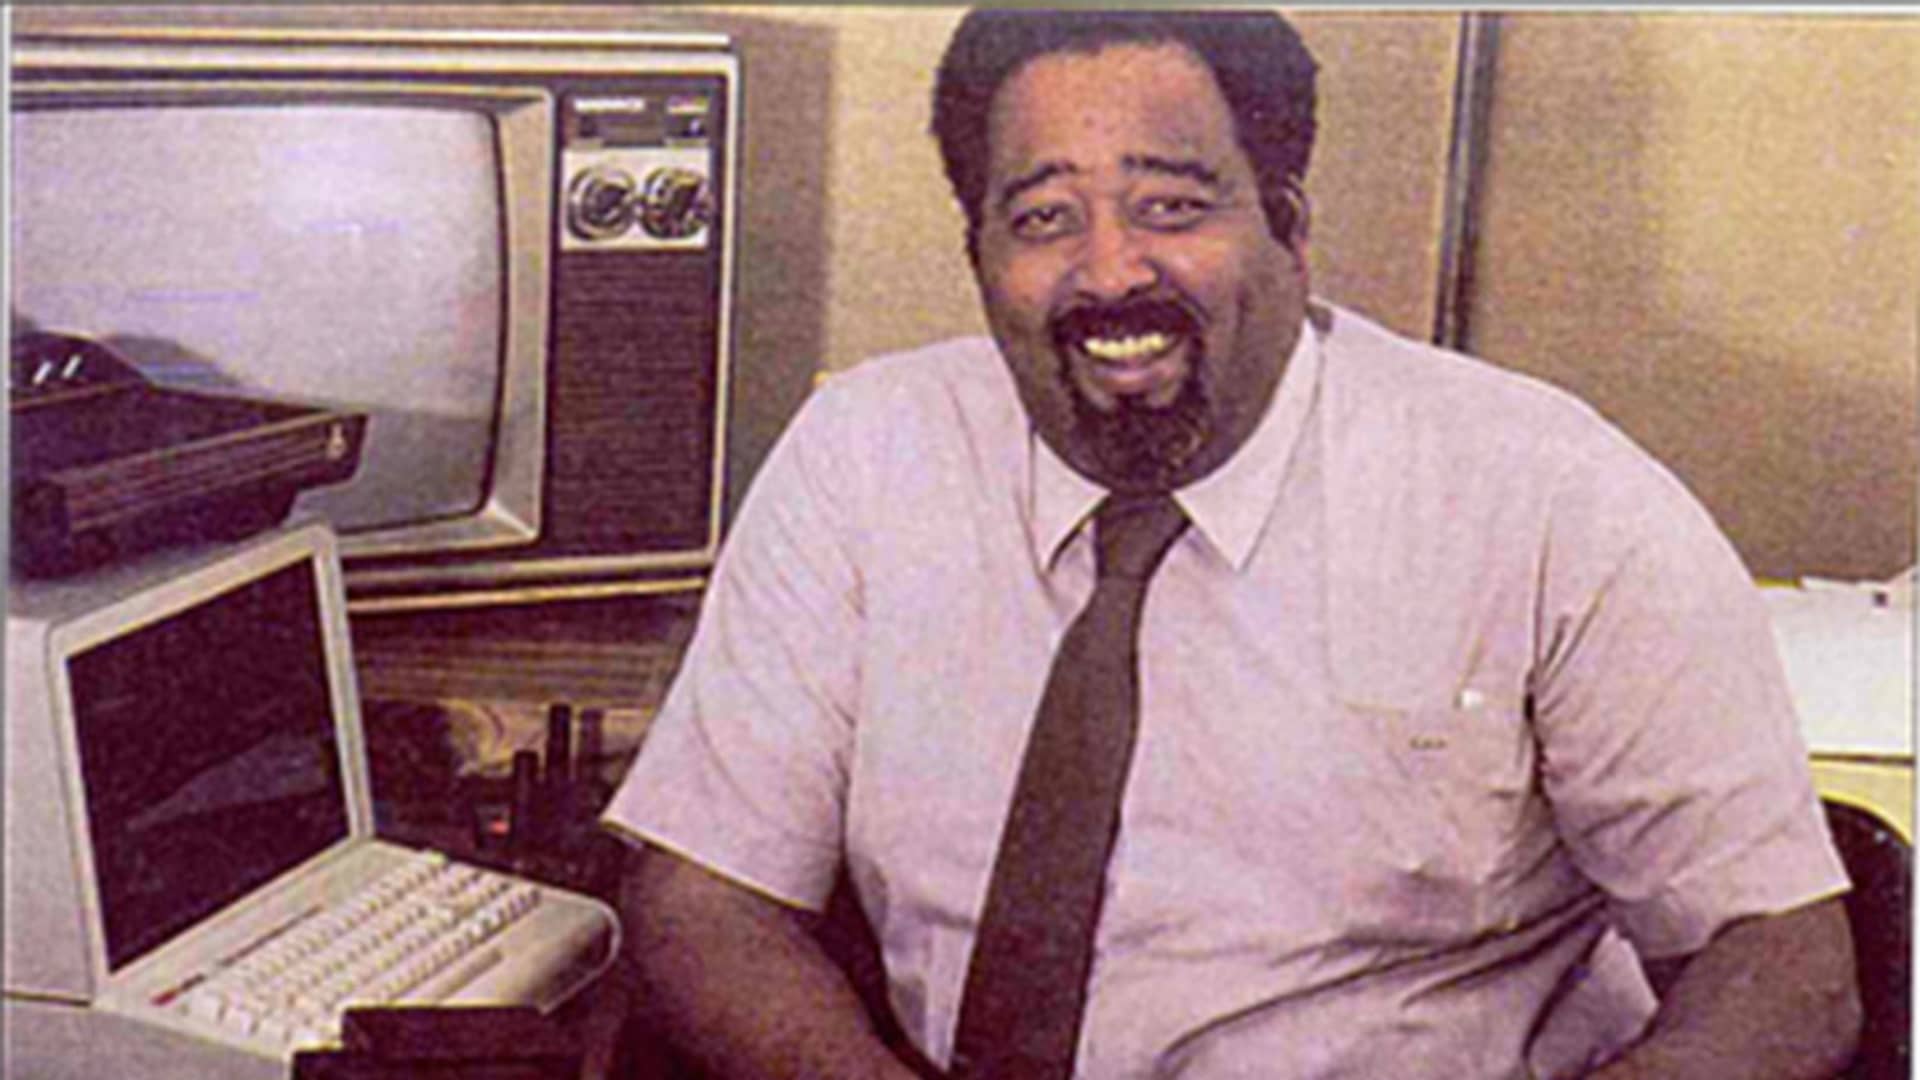 Google Doodle Allows Users to Create Their Own Game to Celebrate Life of  Developer Jerry Lawson- The Mac Observer